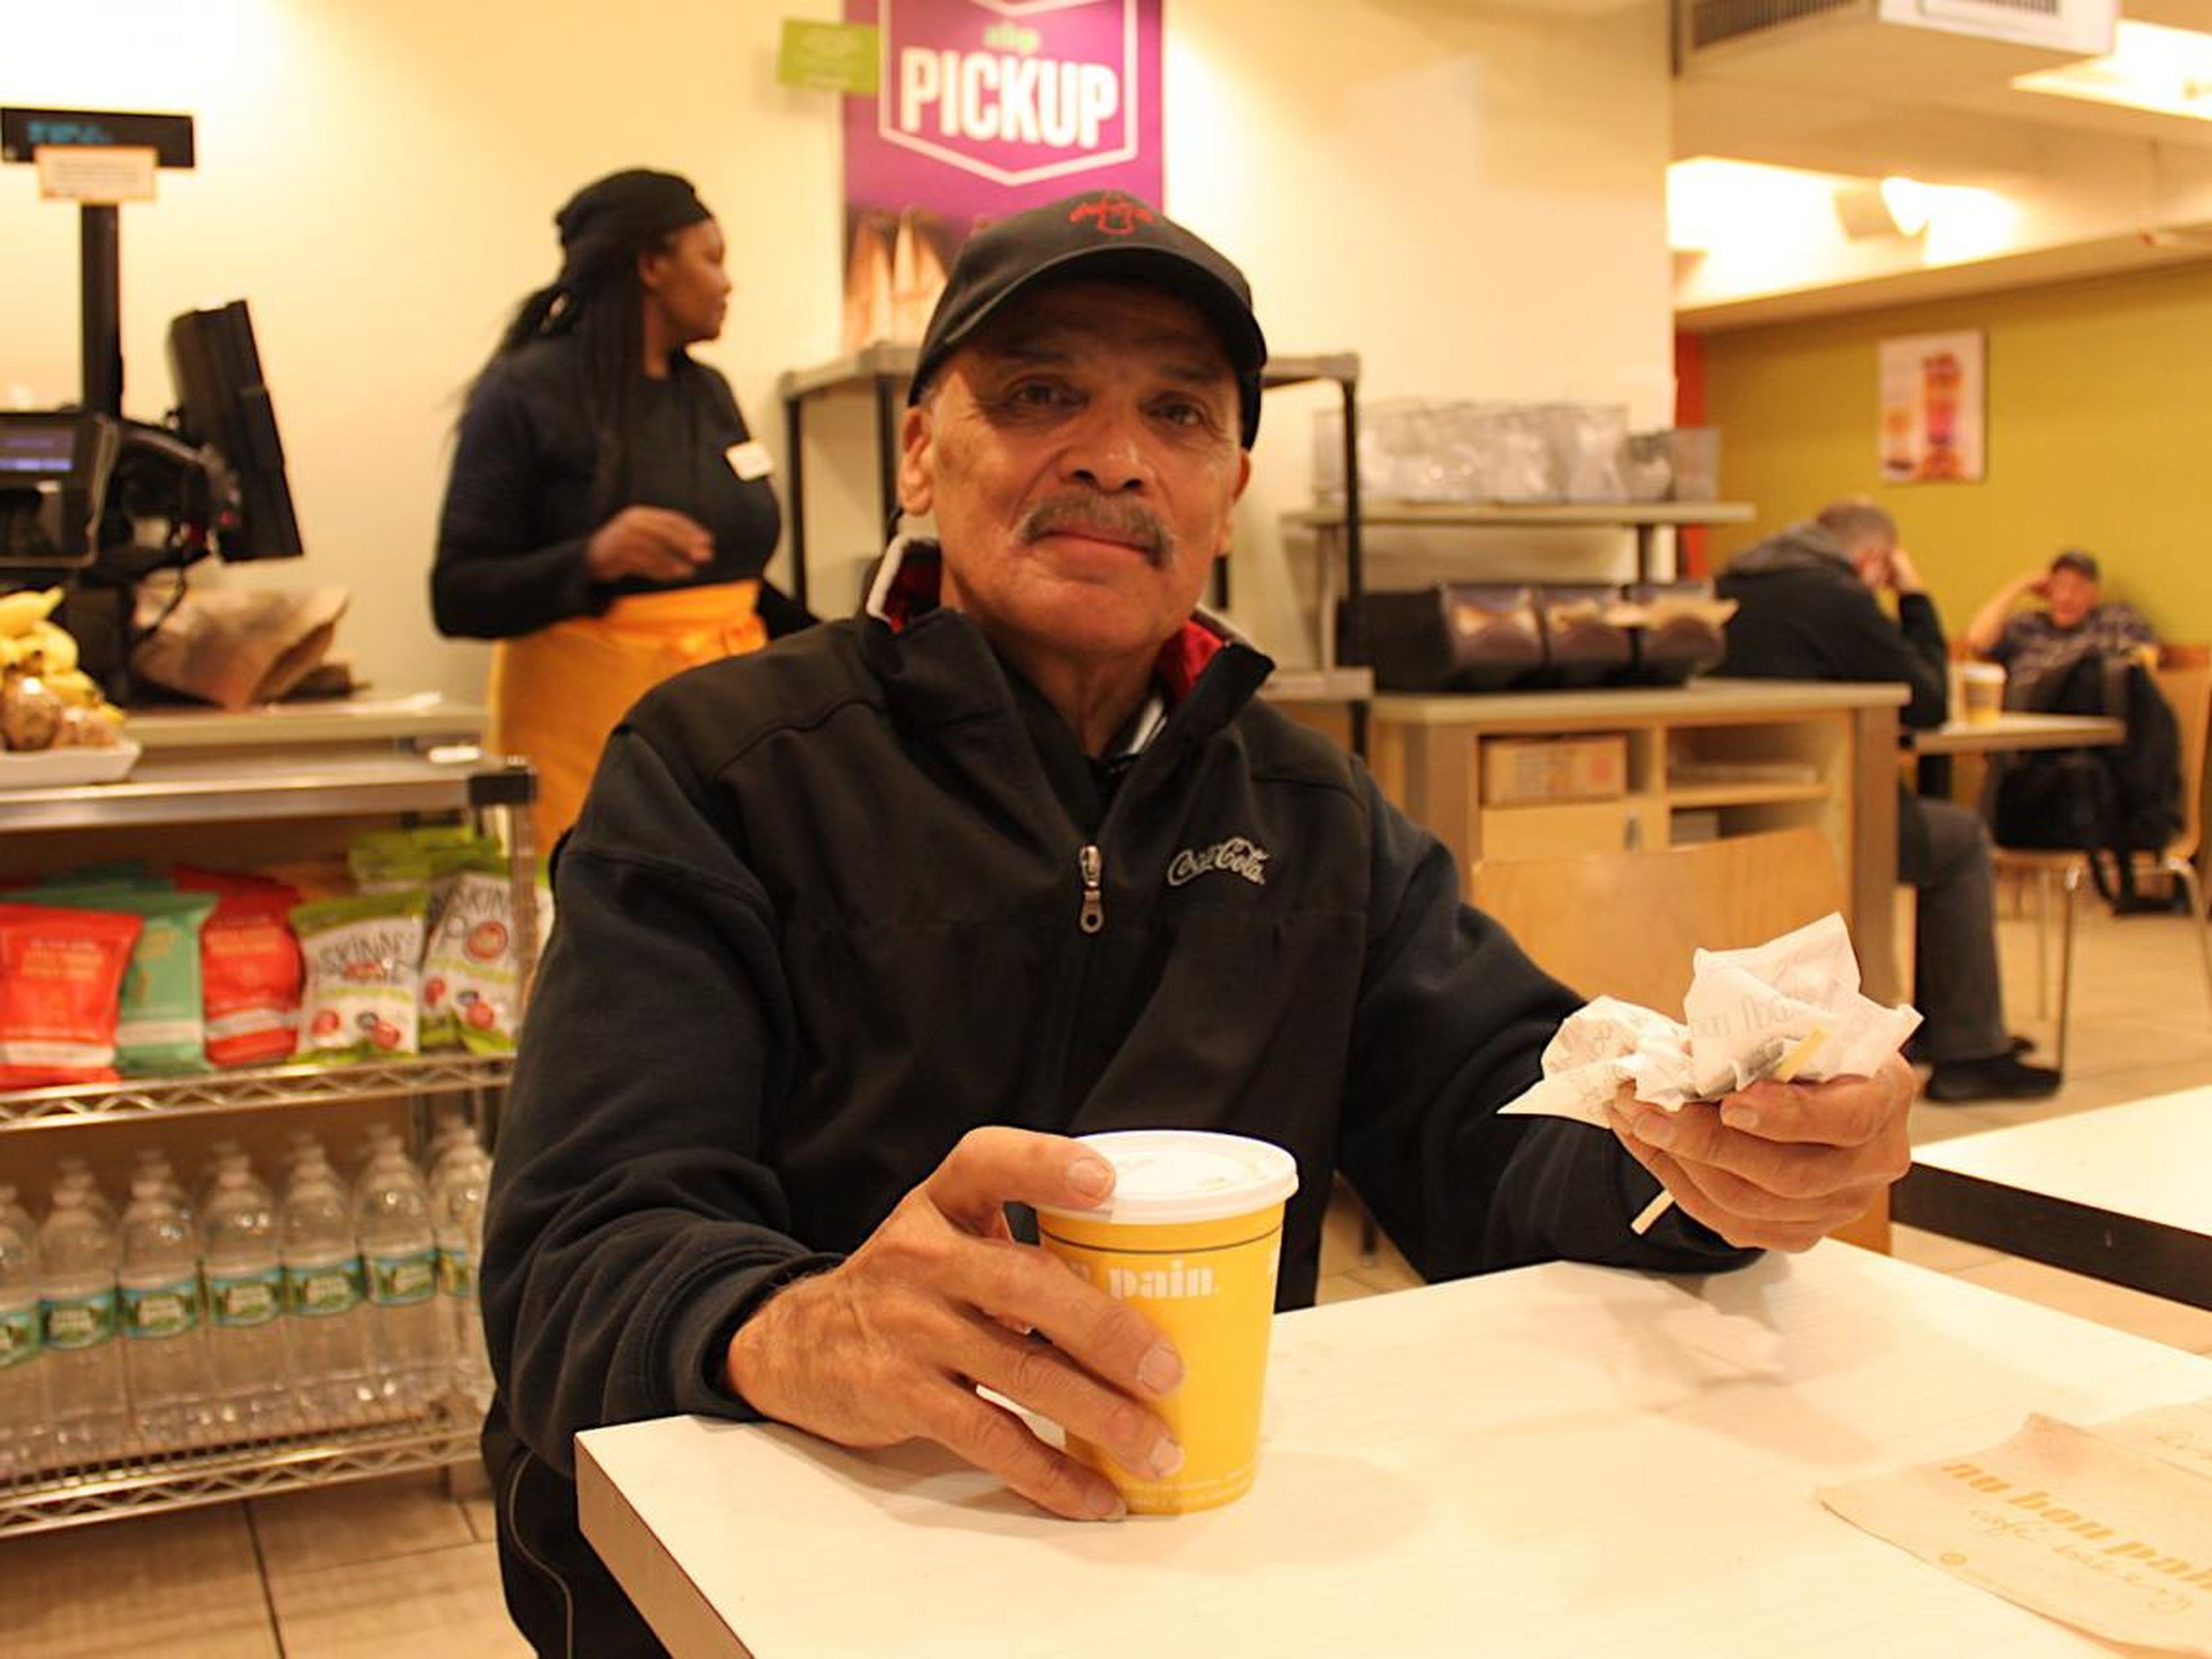 He usually grabs oatmeal and coffee at a bakery near Liberty Coca-Cola, but today he enjoyed a bagel and coffee at Penn Station's Au Bon Pain.